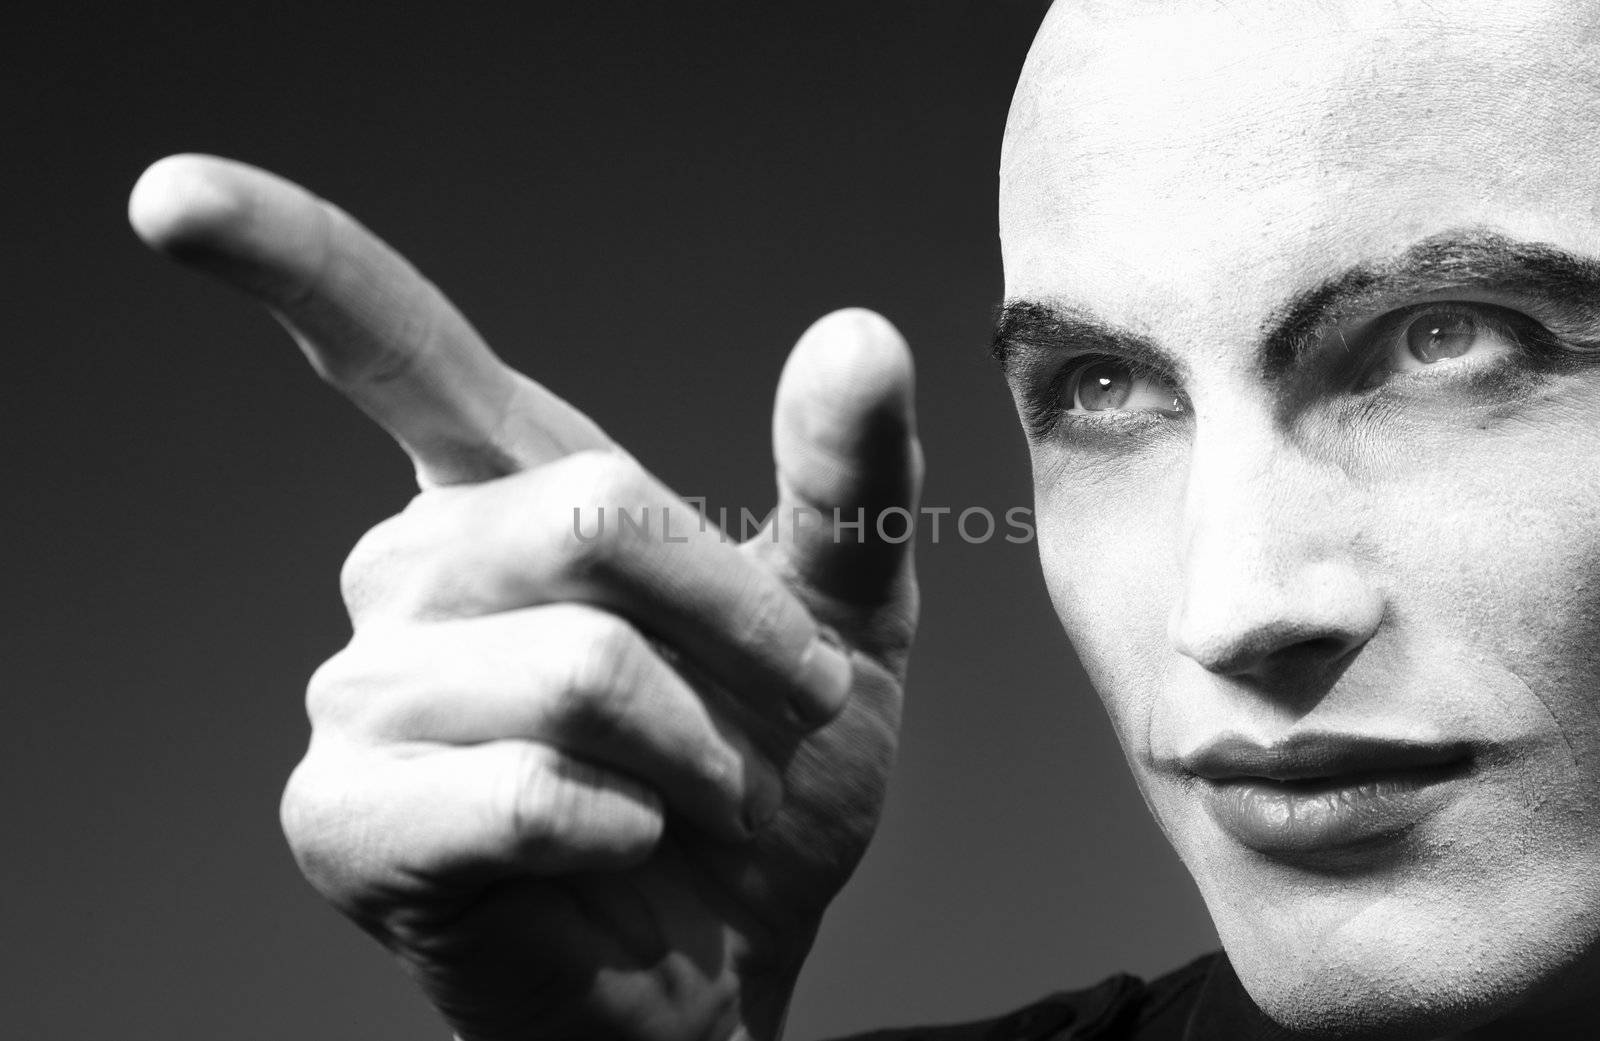 Mad angry funnyman pointing finger. Black and white photo. Artistic darkness added